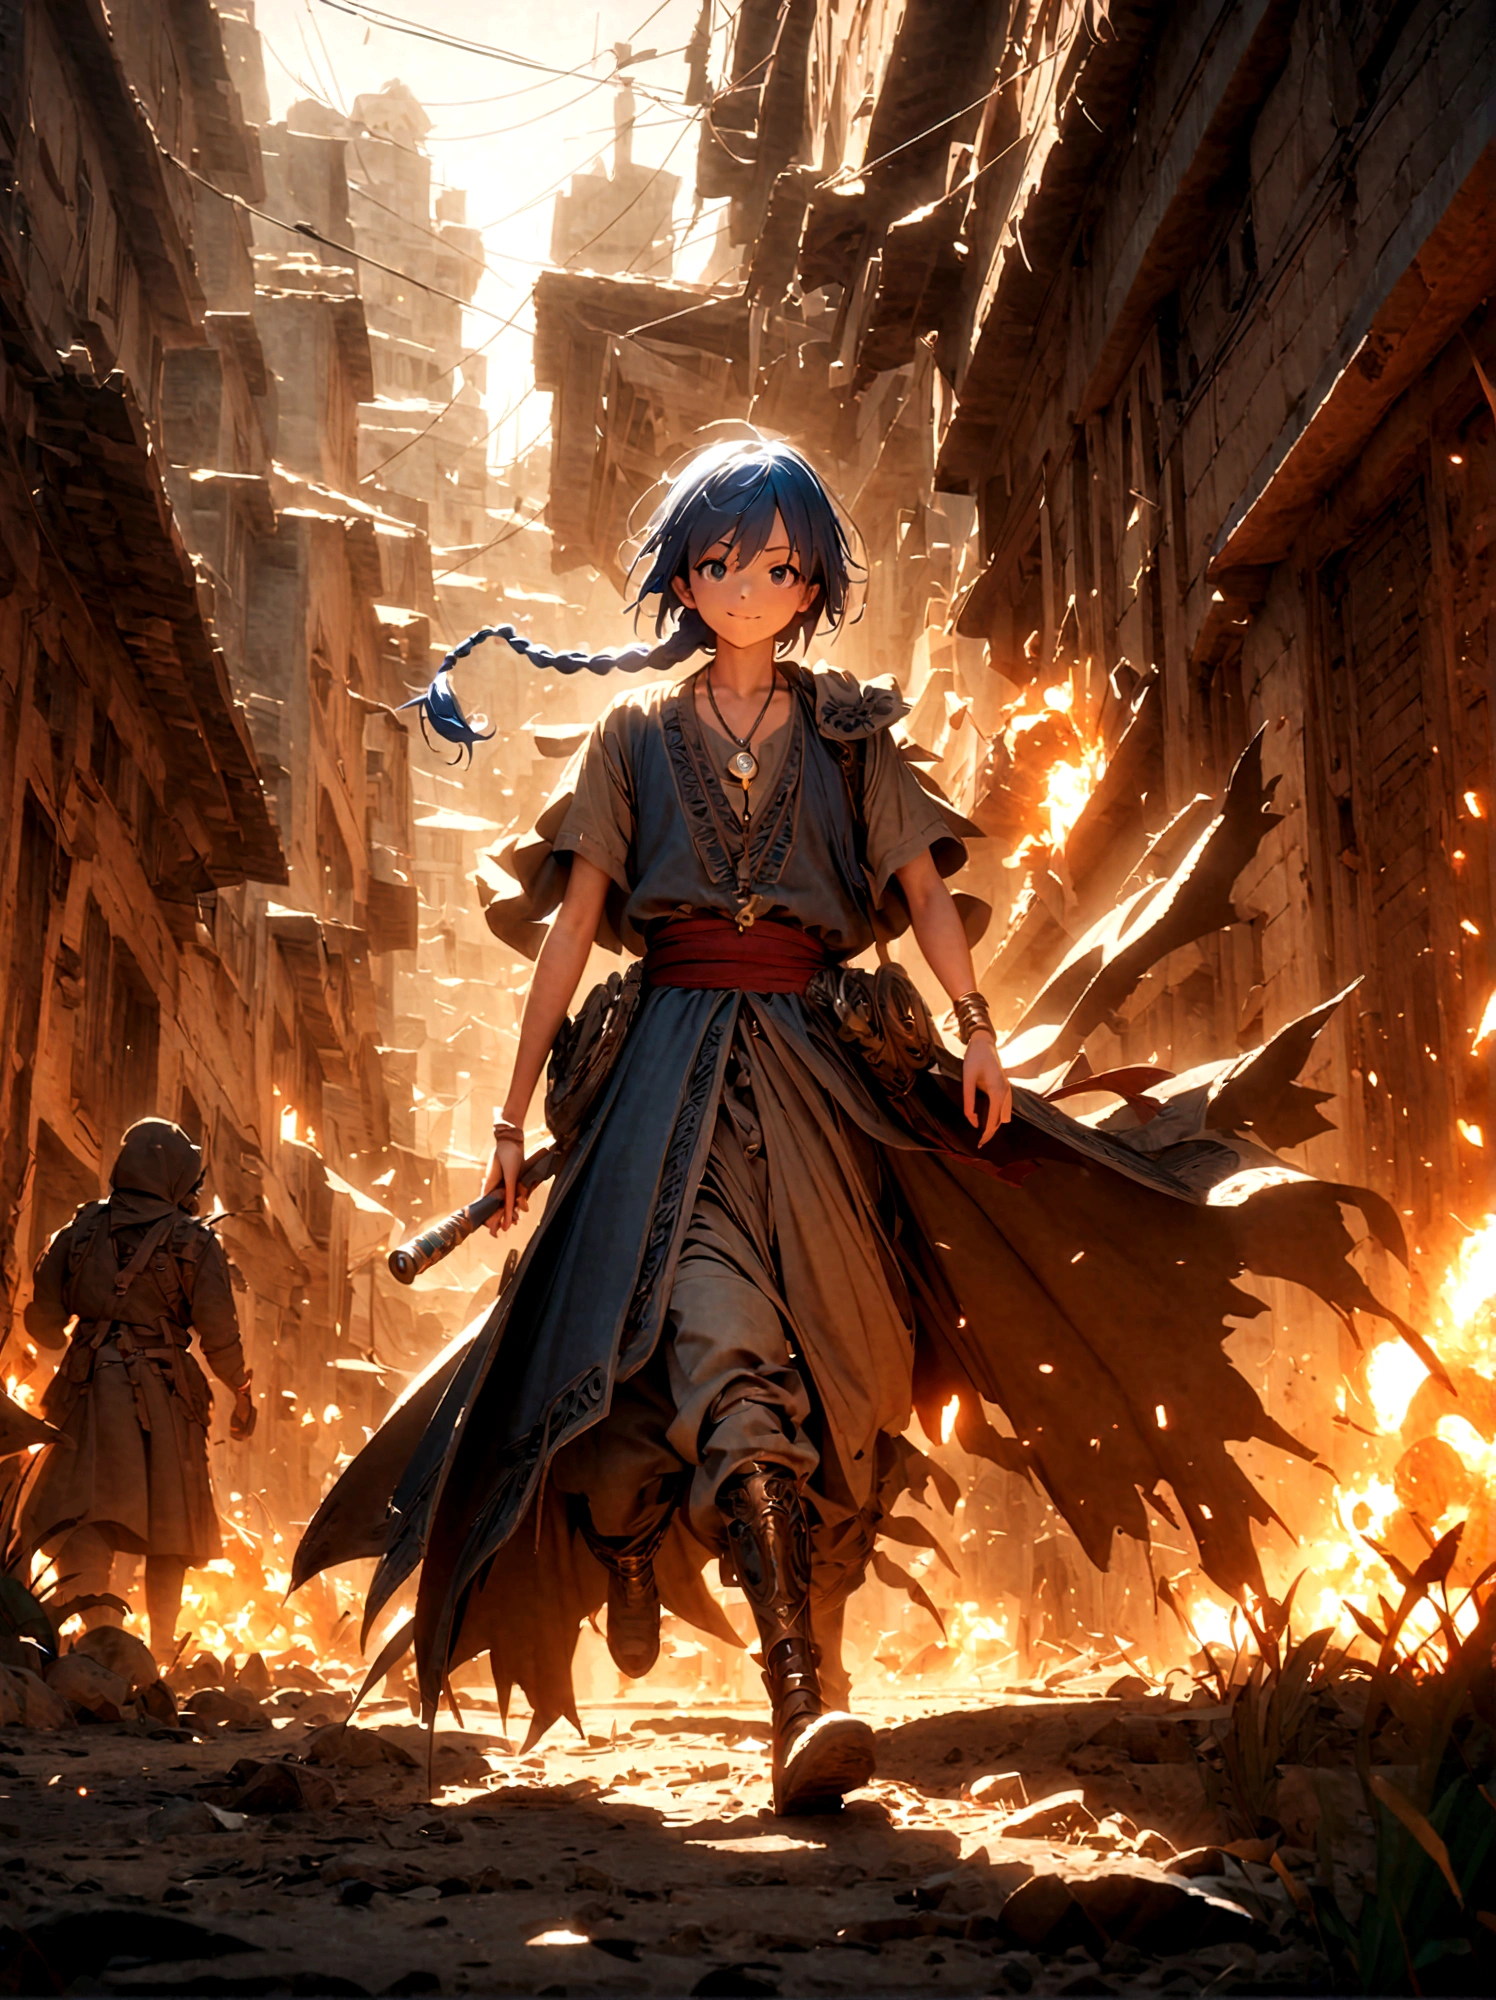 1boy，magi_aladdin，Standing alone in a desert town, He has short blue hair，With a braid，Wear a headscarf，Smiling，A flute pendant hangs around her neck，Wearing a blue vest, A magical explosion can be seen in the background，Super large magic circle，lightning，fighting，Mouth tightly shut，sneer，Soft lighting and detailed environments create an immersive environment，Let your imagination run wild with super details, Ultra-detailed face, High-quality visual effects, Sharp focus, Octane Rendering, 8k, Ultra HD